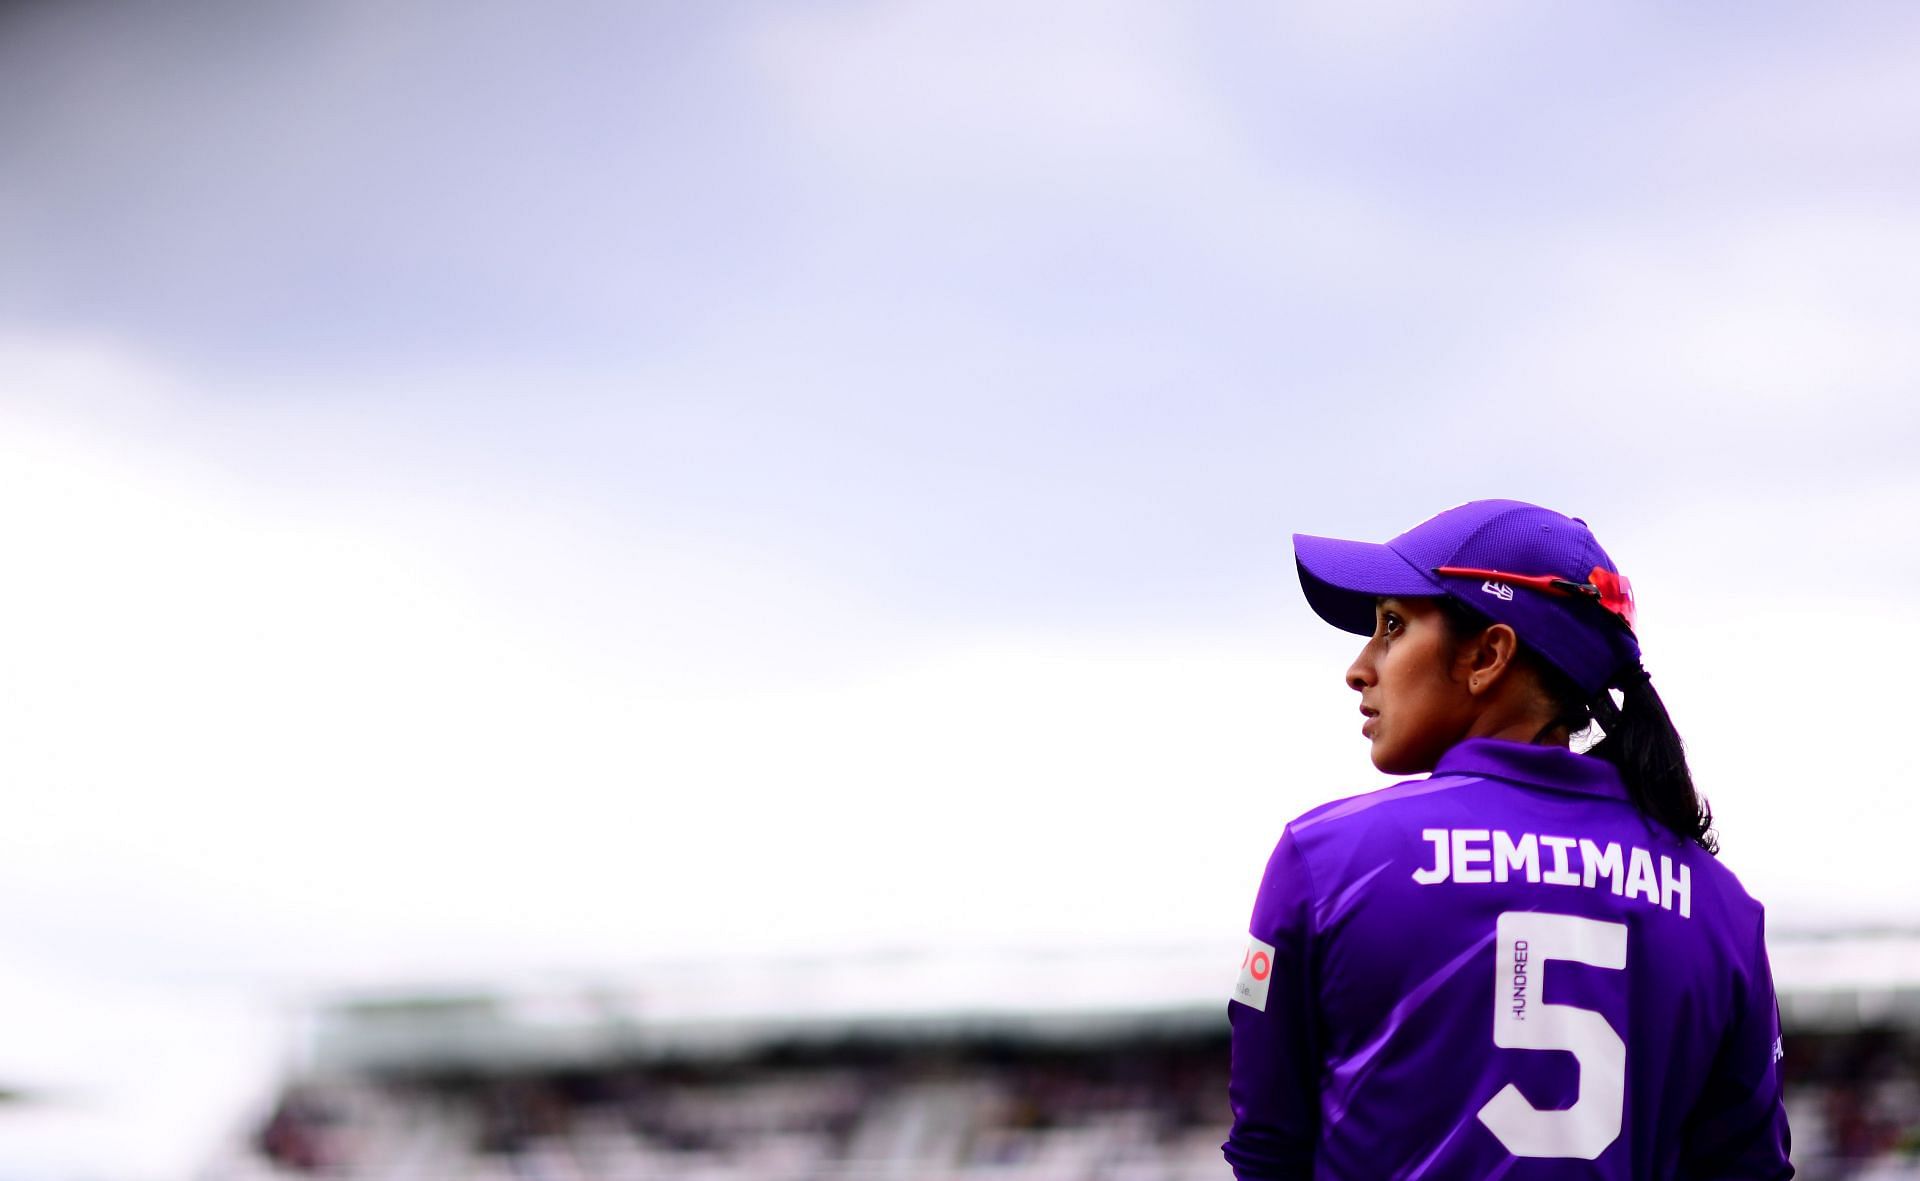 Jemimah Rodrigues was dropped from the team ahead of the NZ tour and ODI World Cup.